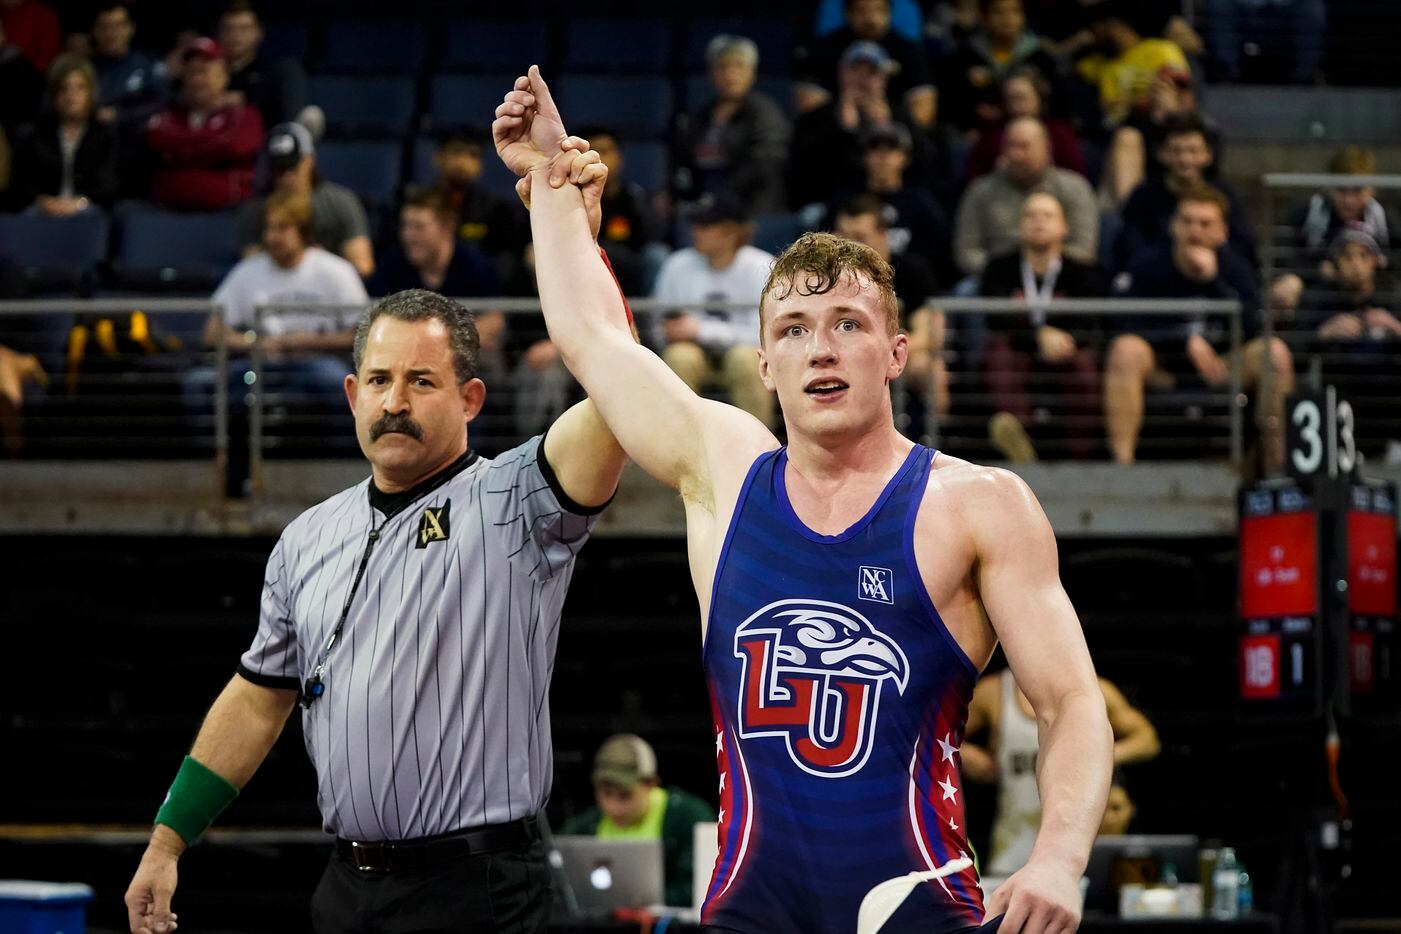 Joe Scott of Liberty University is acknowledges as the winner after defeating Desmond Bowers...